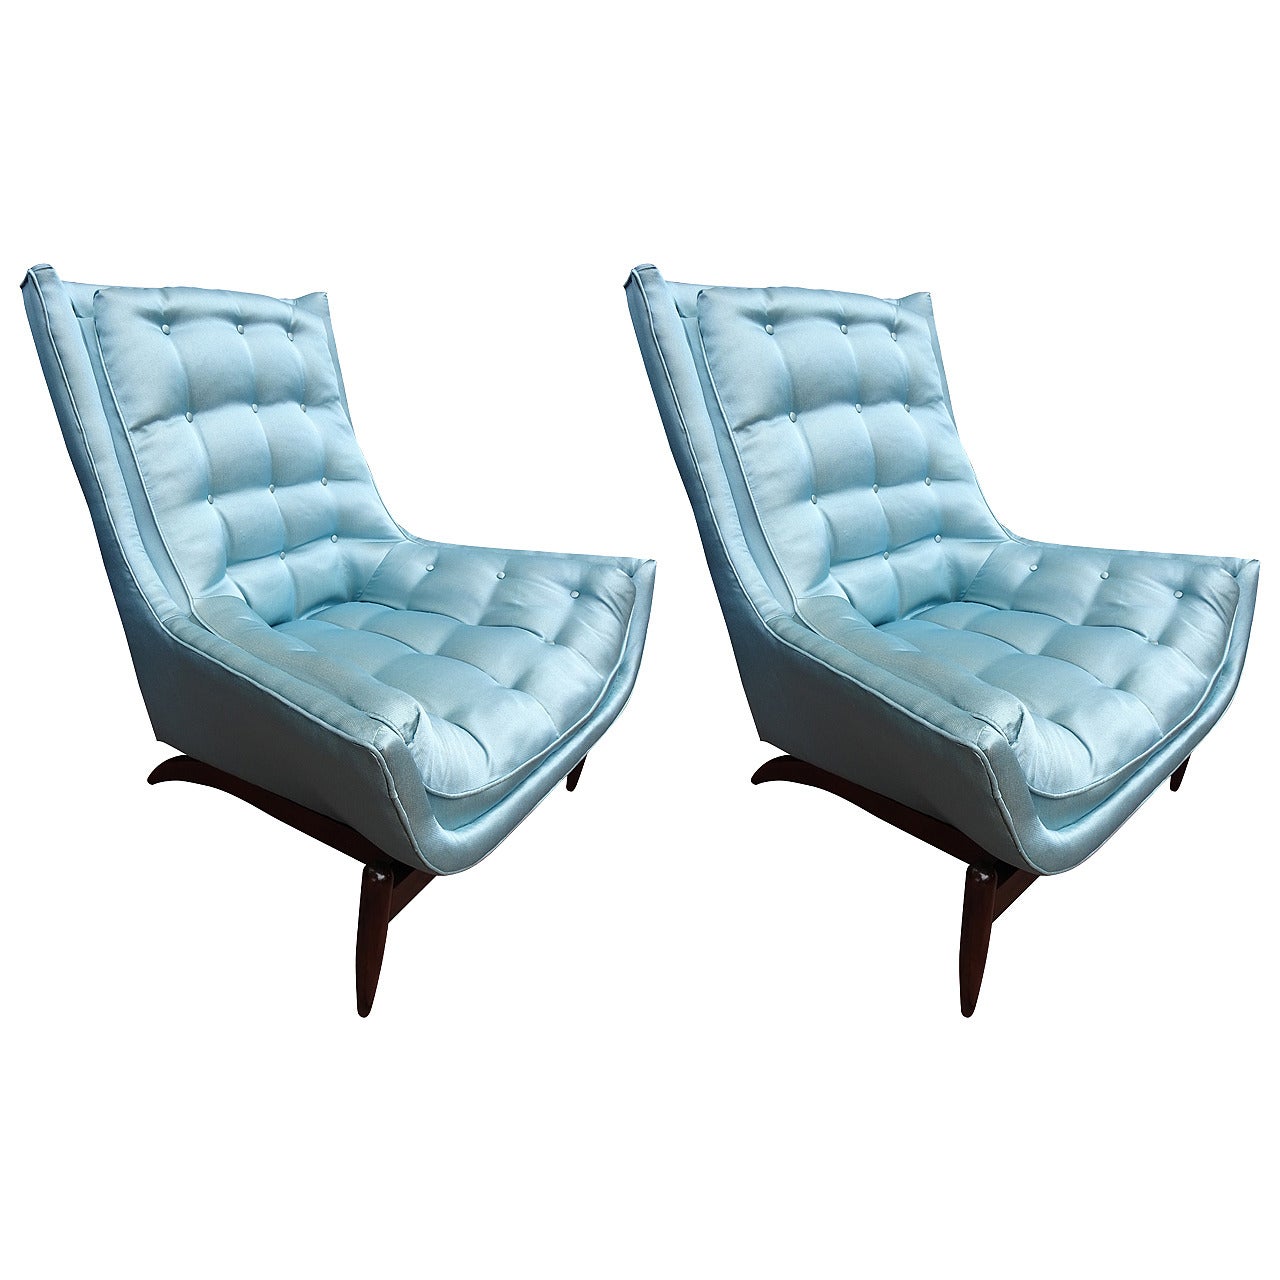 Pair of Mid-Century Kagan Style Lounge Chairs For Sale